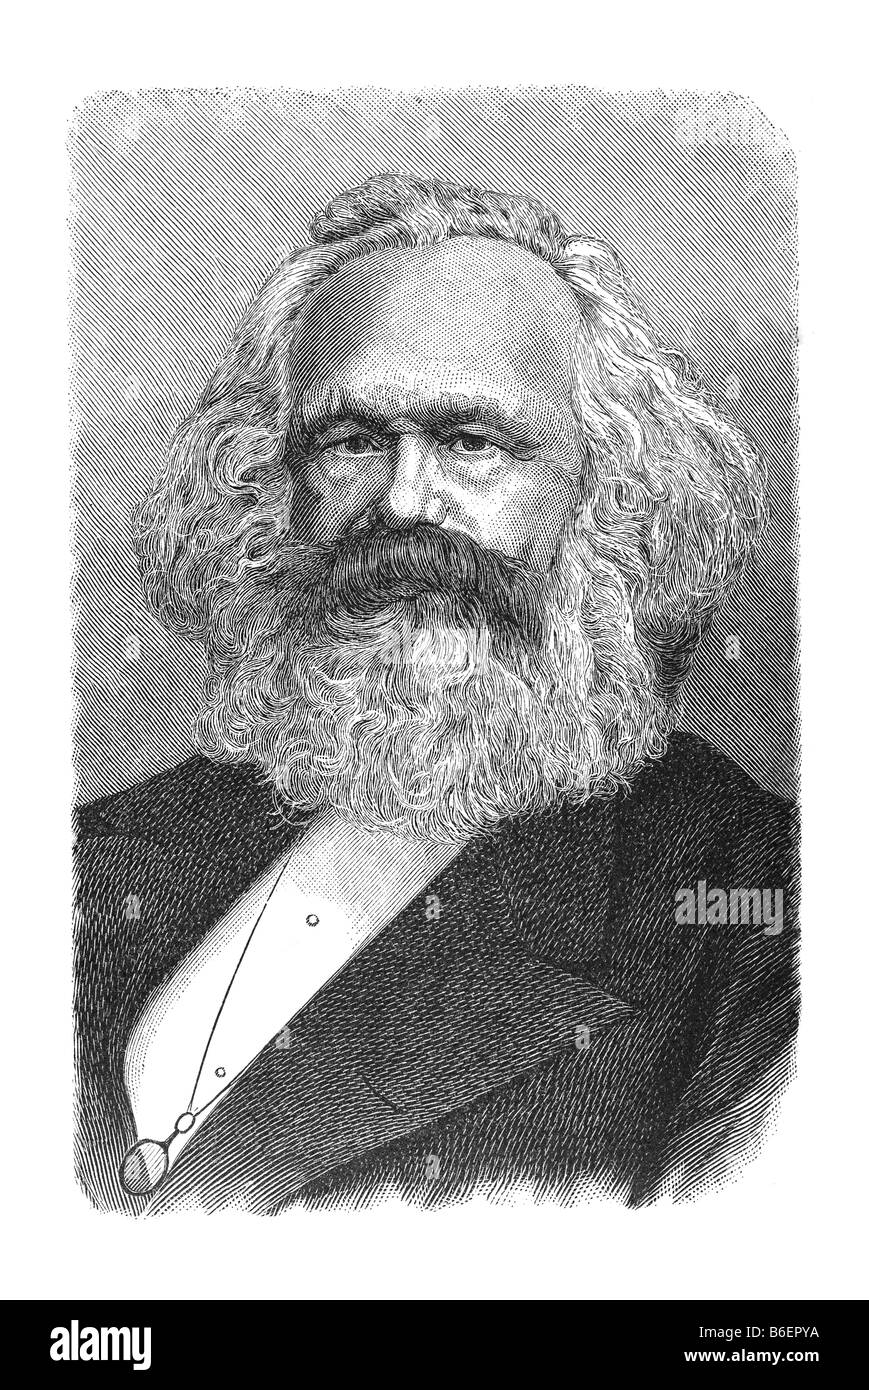 Karl Heinrich Marx, 5. May 1818 Trier - 14. March 1883 London Stock Photo